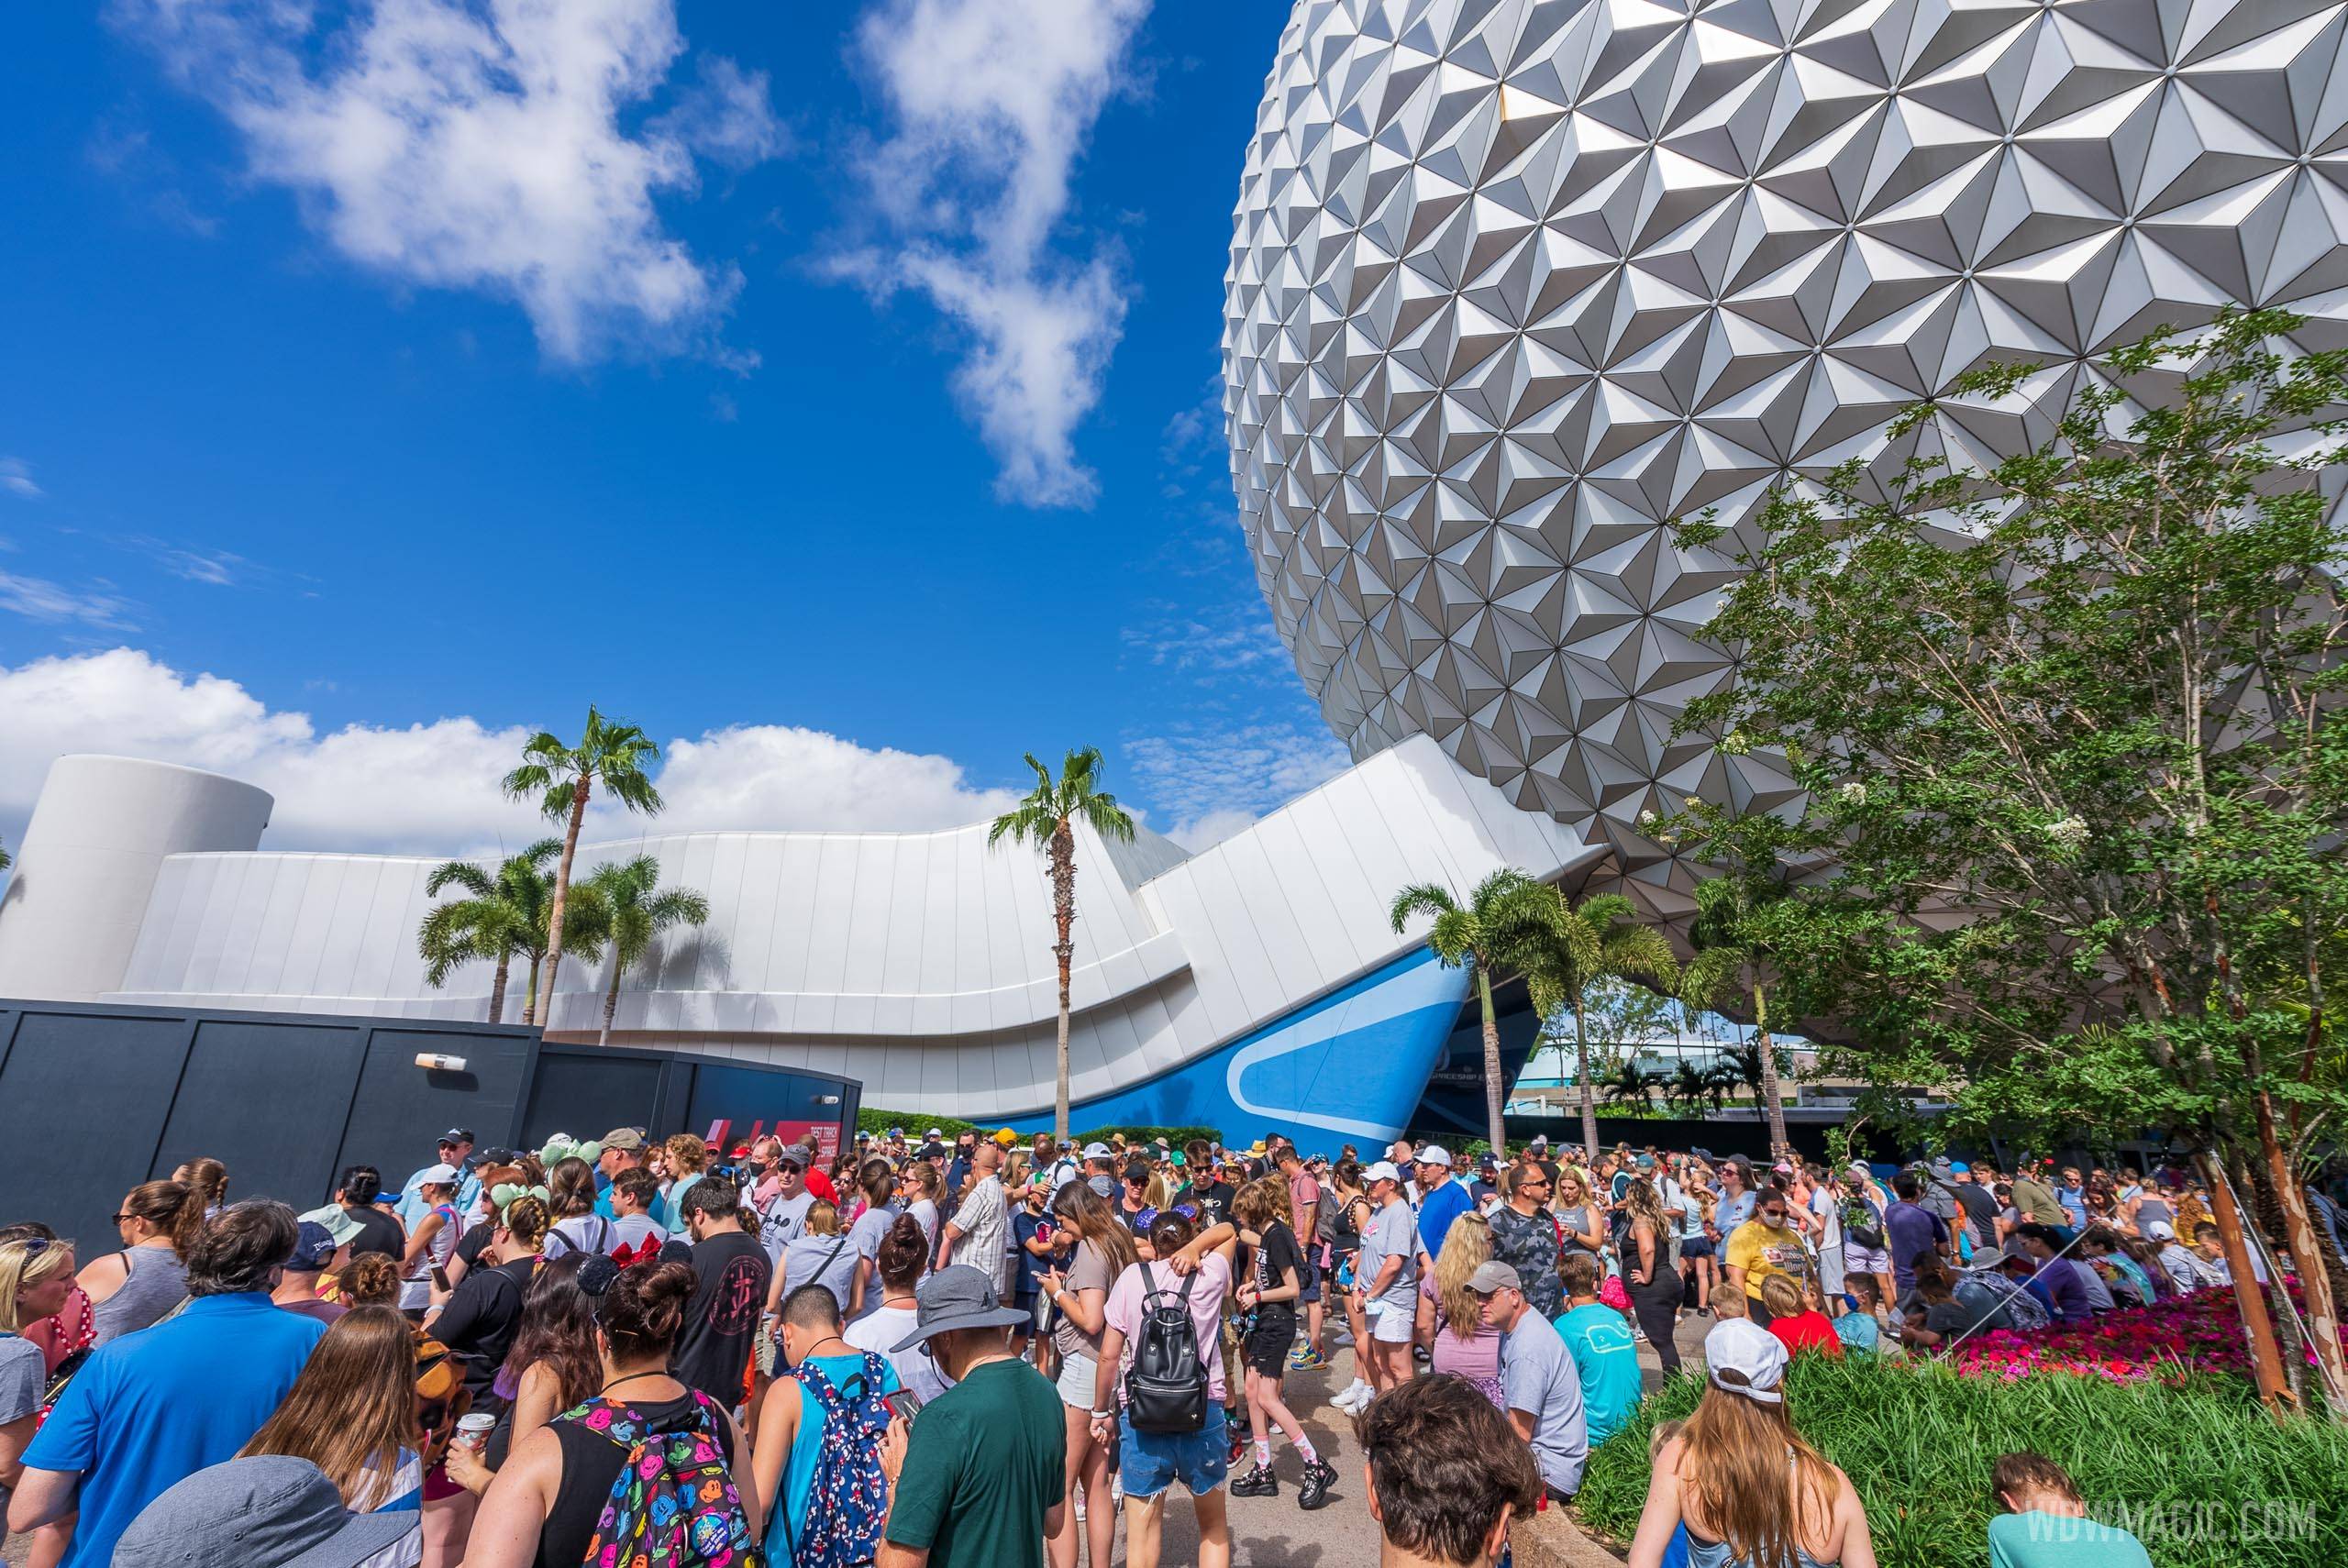 Rope drop returns to Walt Disney World theme parks as physical distancing continues to be reduced